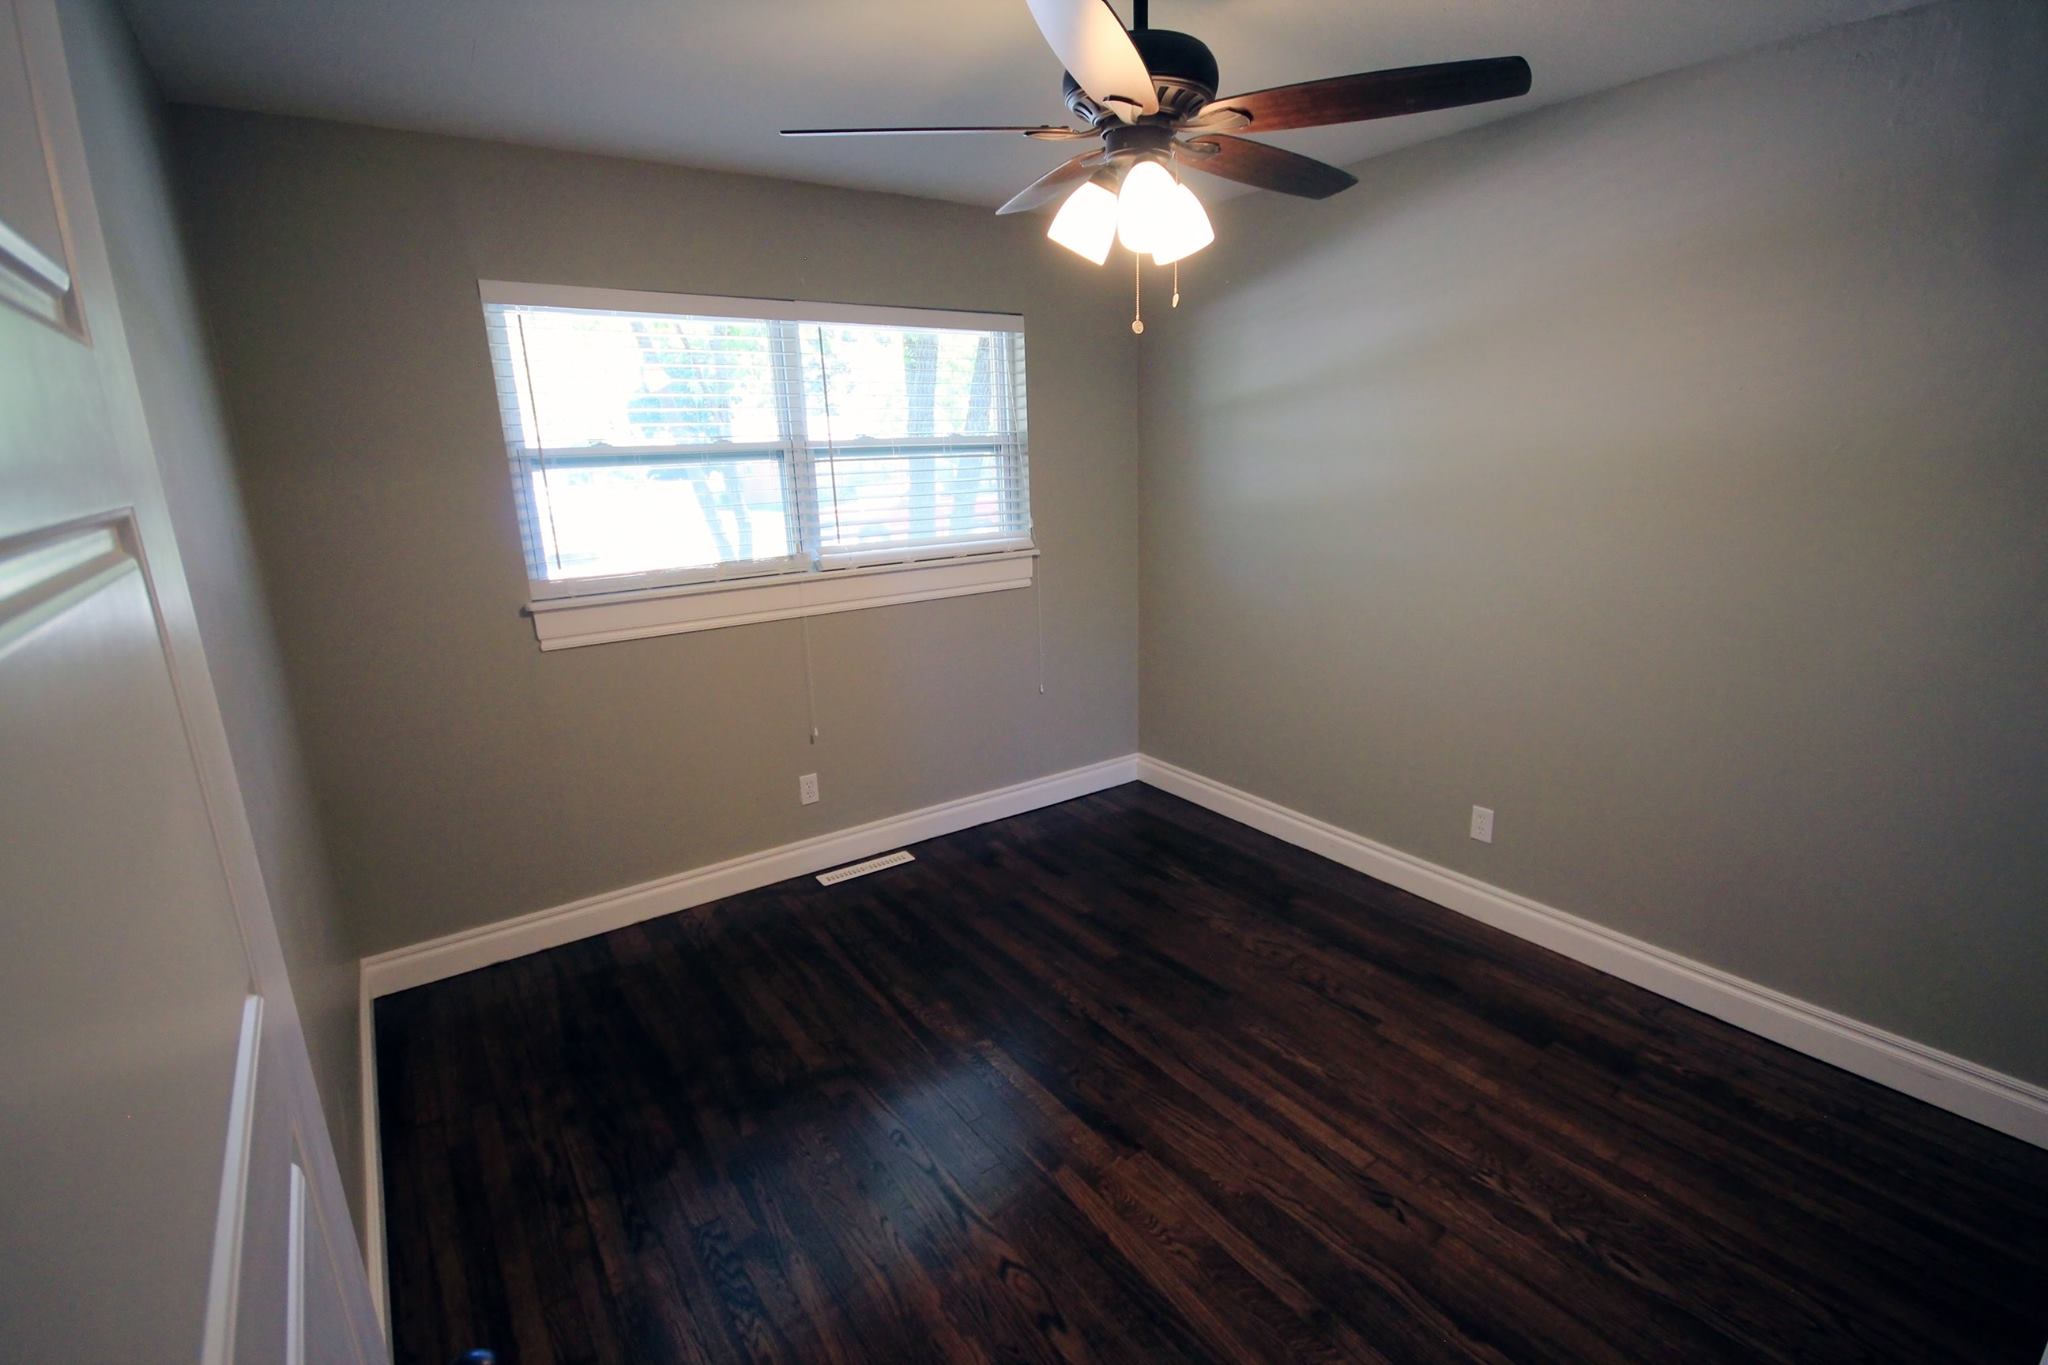 A bedroom with hard wood floors and ceiling fan.